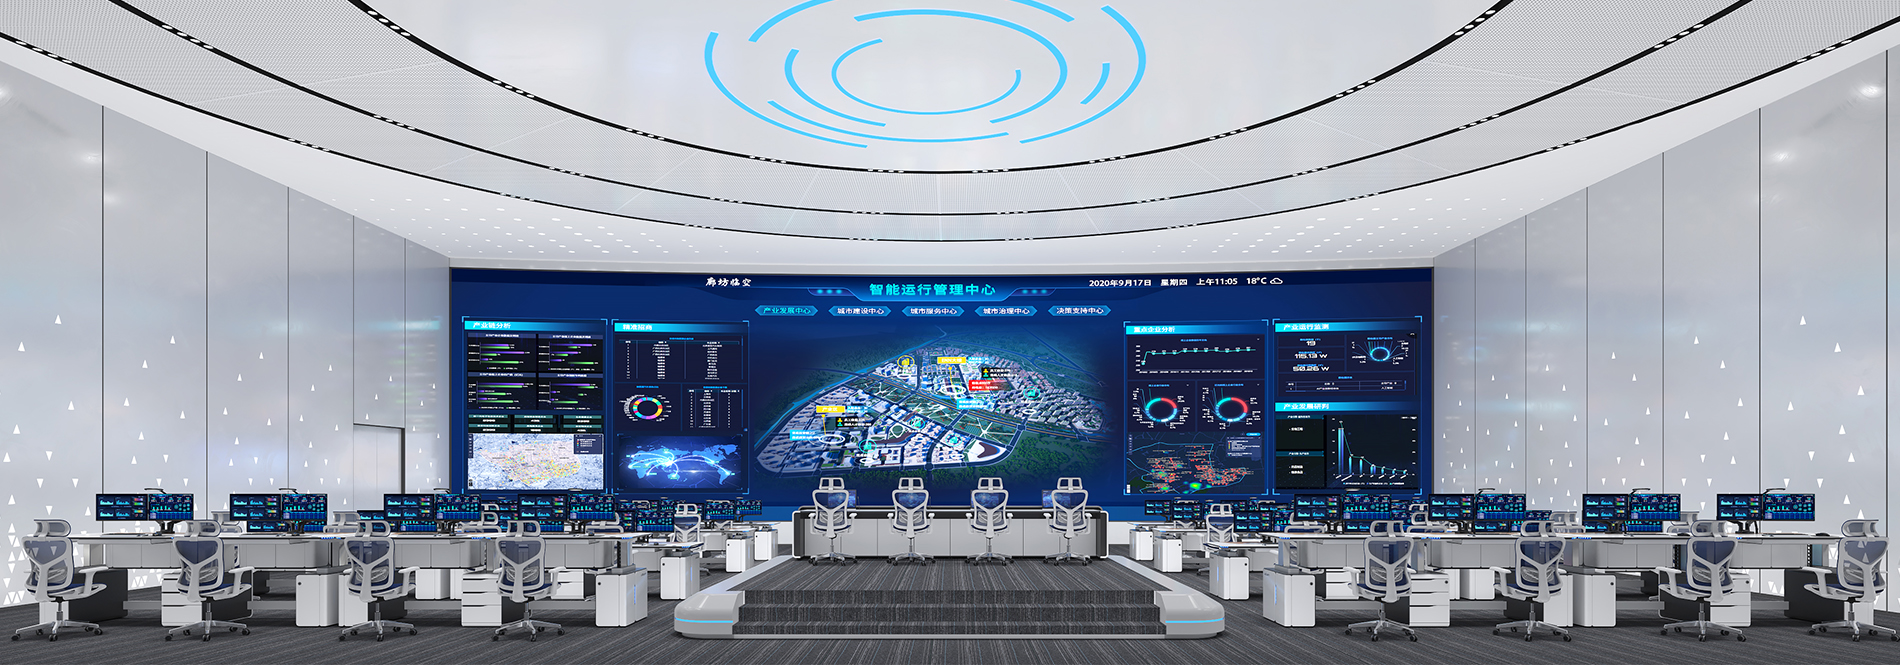 Multi-user workstation consoles play a crucial role in the room layout of security command centers, as reflected in several key aspects.